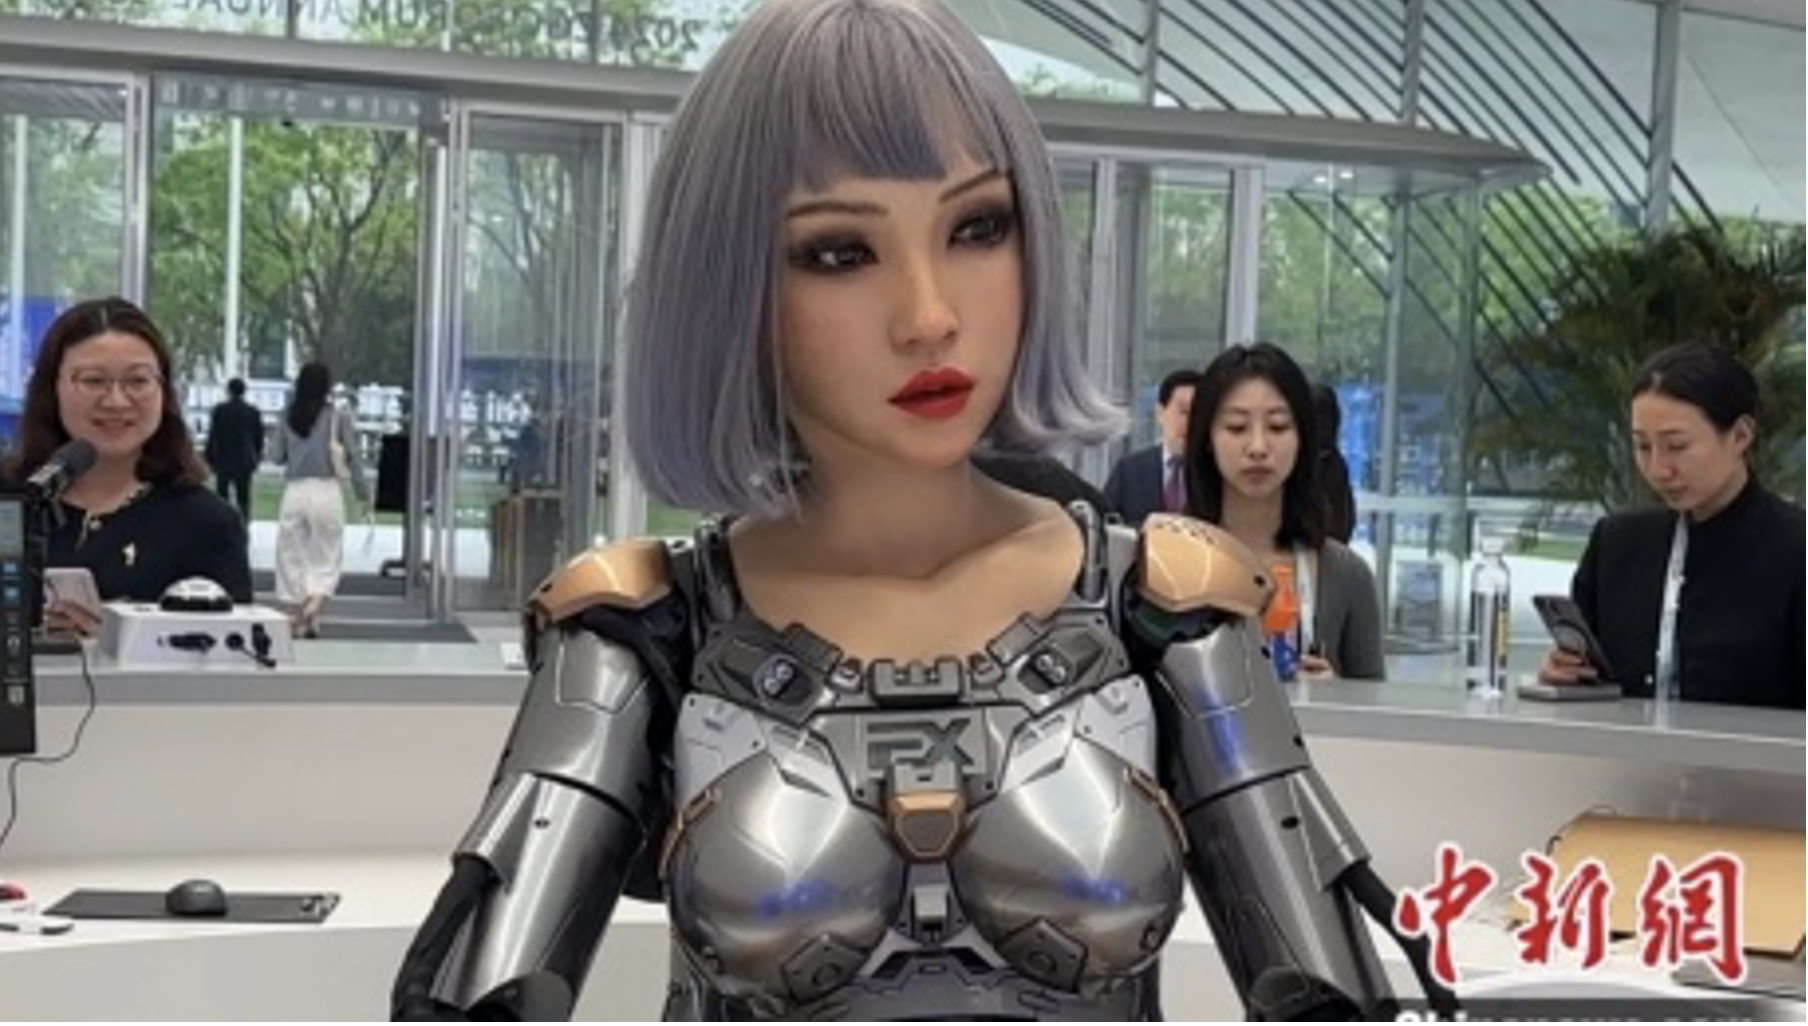 2024/06 Mass production of humanoid robots has started in Dalian